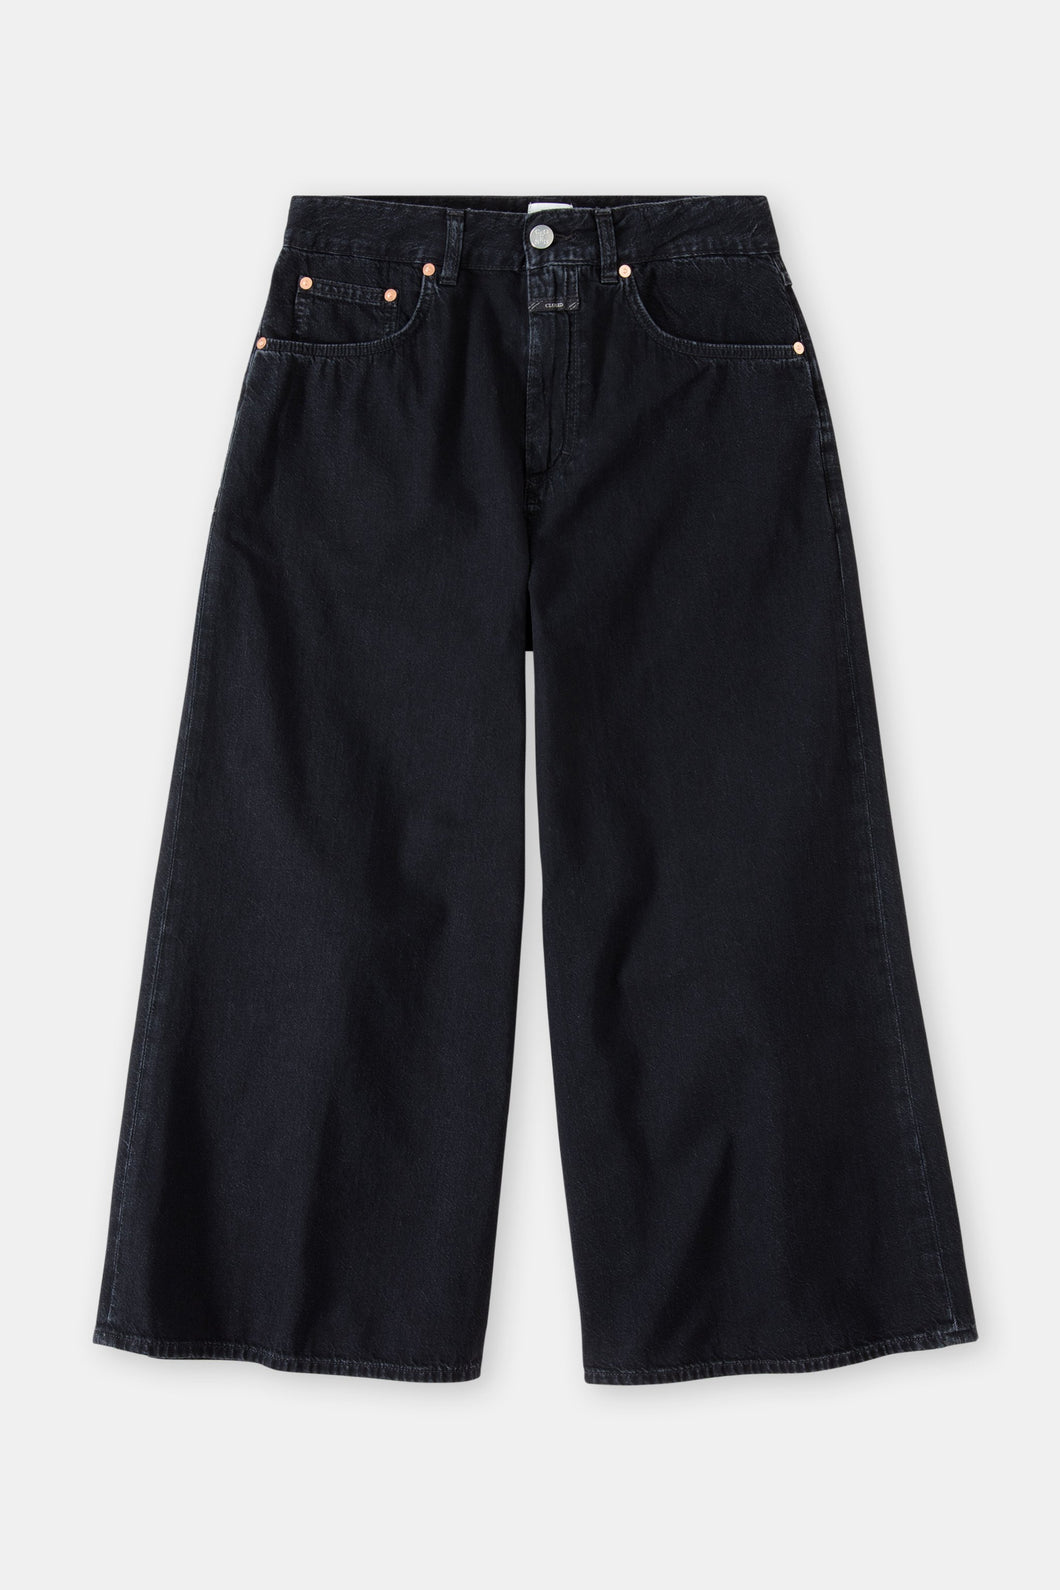 Closed Wide Jeans - Style Name Lyna